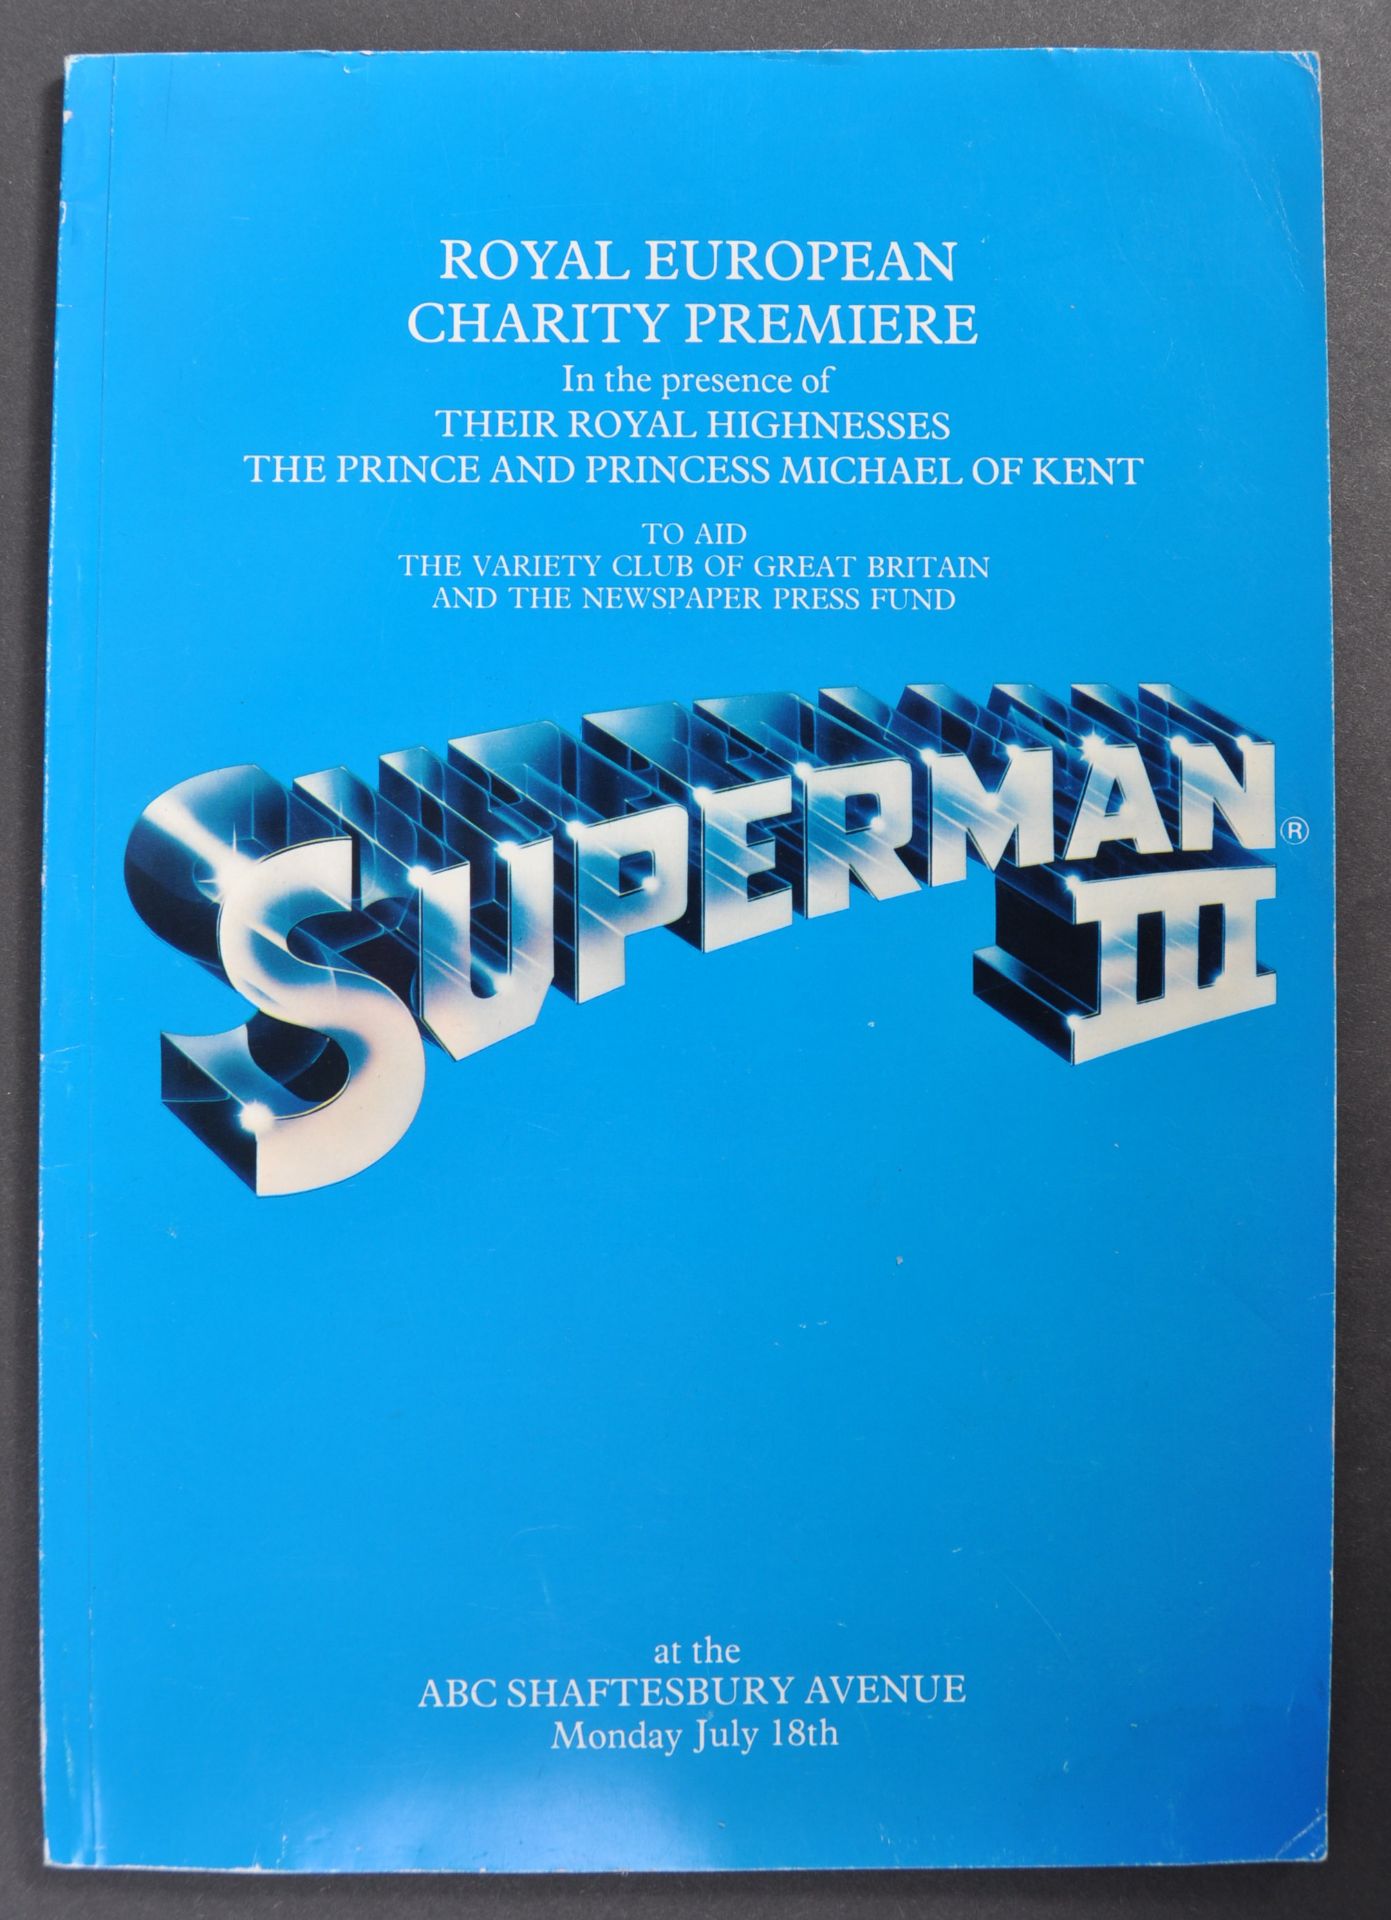 ESTATE OF DAVE PROWSE - PROWSE'S PERSONAL SUPERMAN III PREMIERE BROCHURE